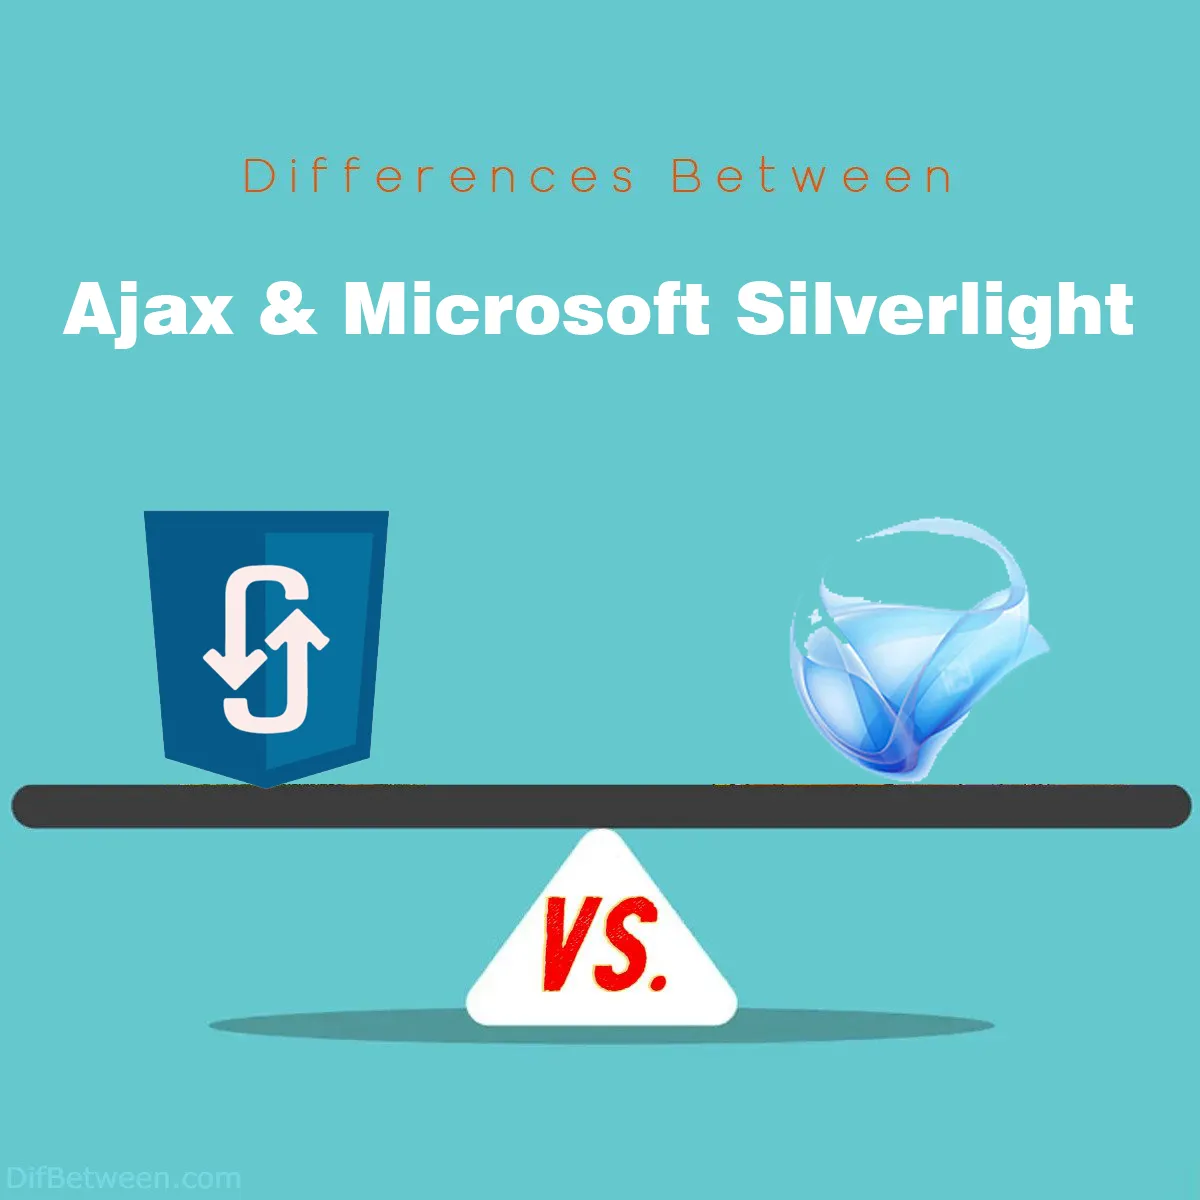 Differences Between Ajax and Microsoft Silverlight